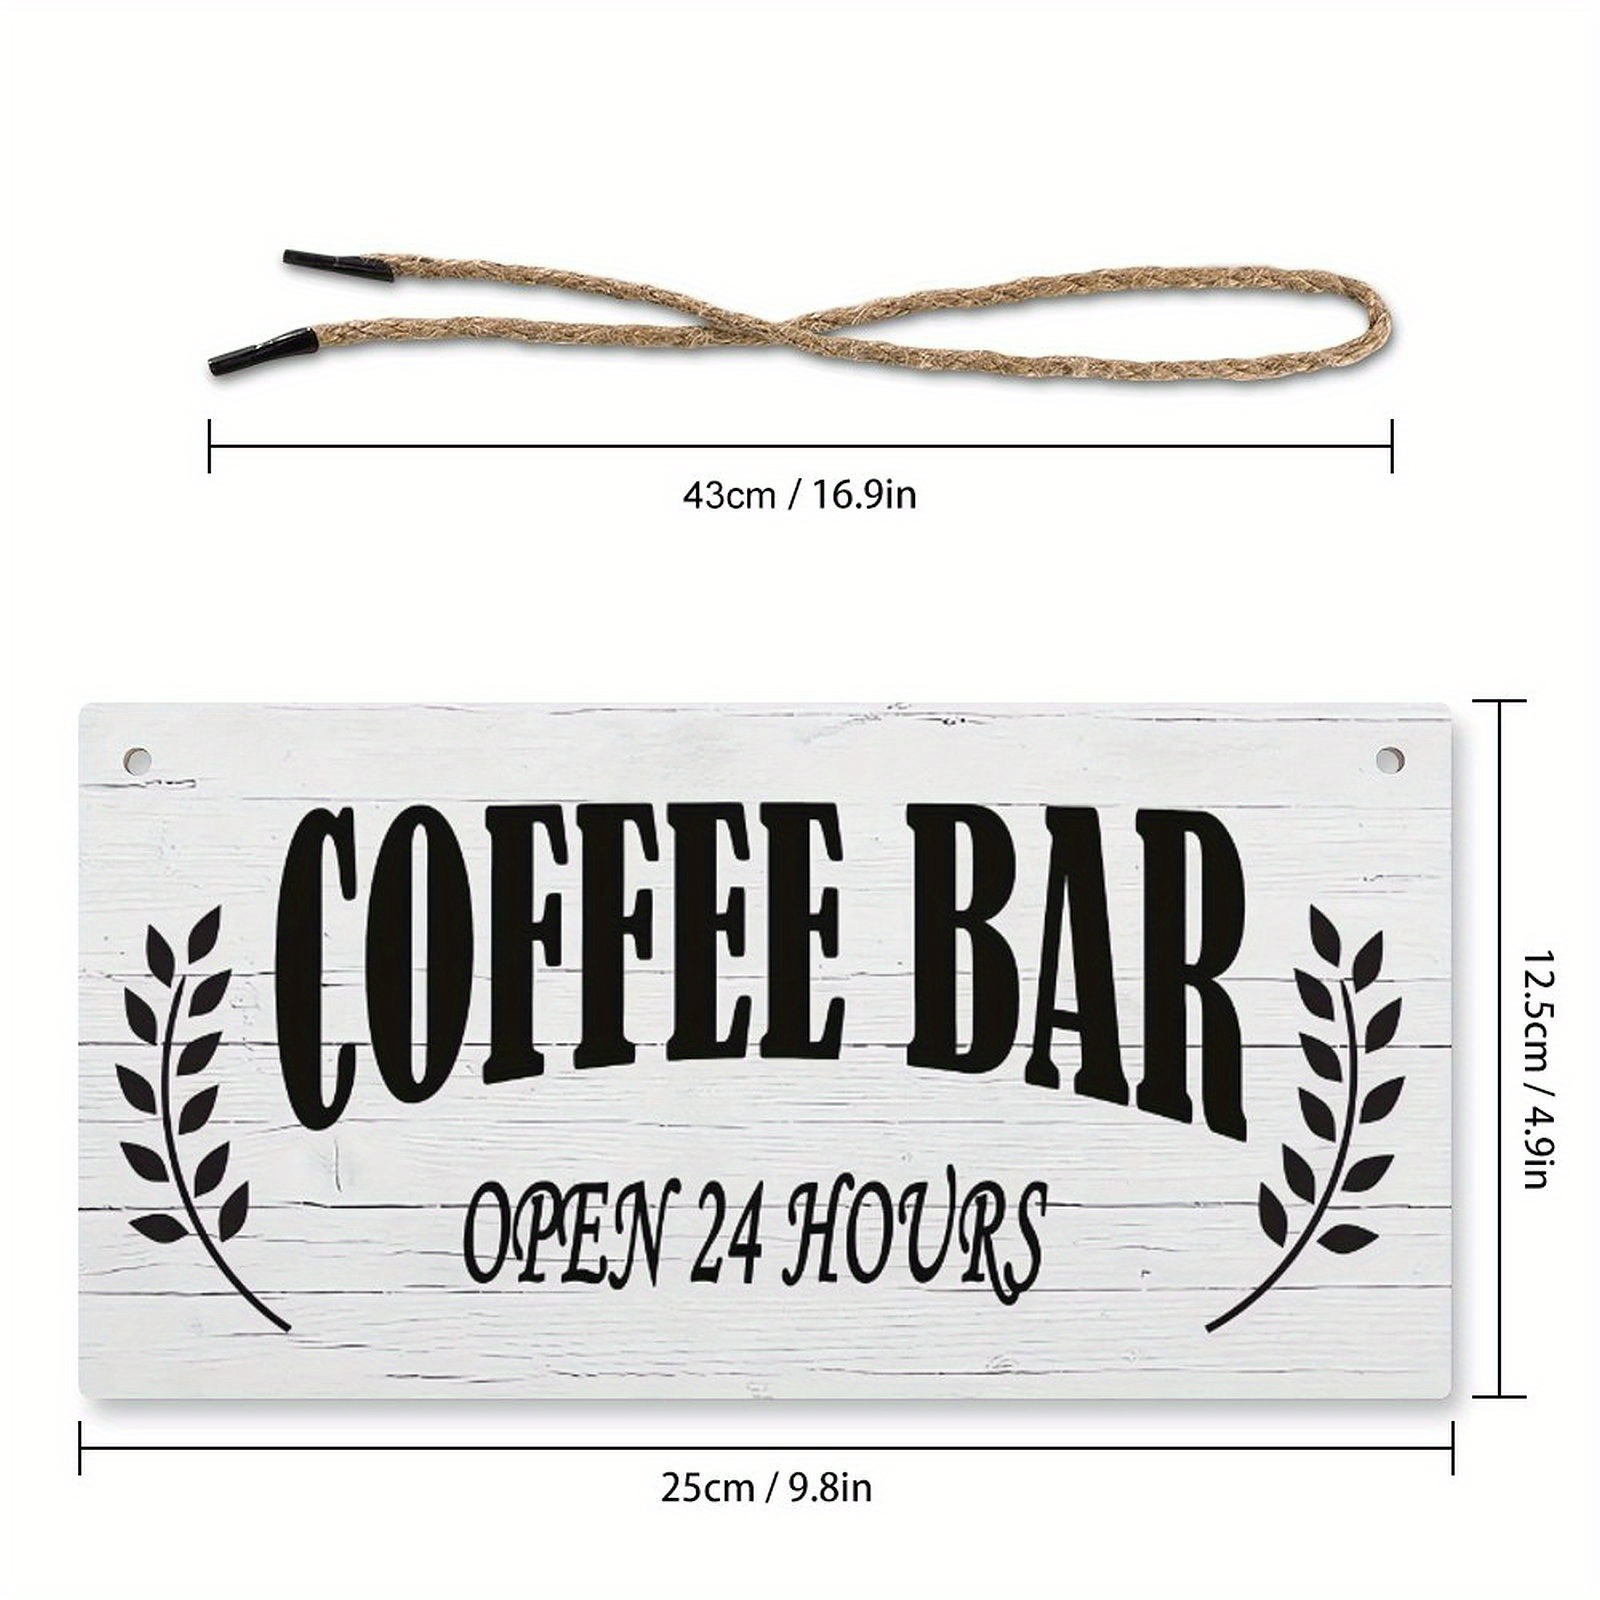 Coffee Bar Open Daily Cafe Decor Wood Hanging Plaque 5X10 Inch Coffee Signs  Modern Bar Accessories Kitchen Home Pub Shop Coffee Station Farmhouse  Decorative 